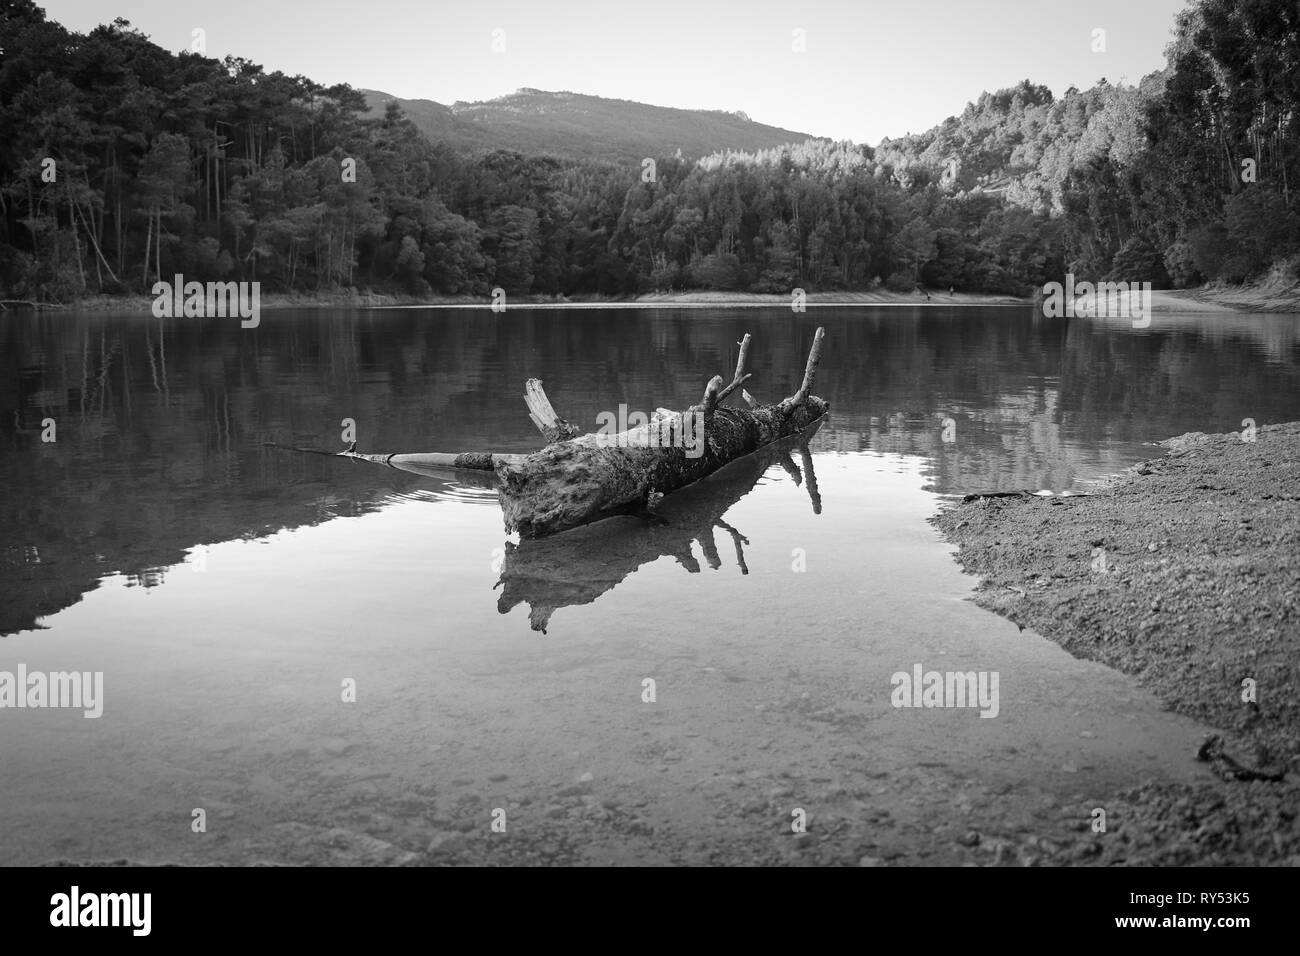 Old tree trunk fallen in a lake surrounded by trees on a mountain. Stock Photo